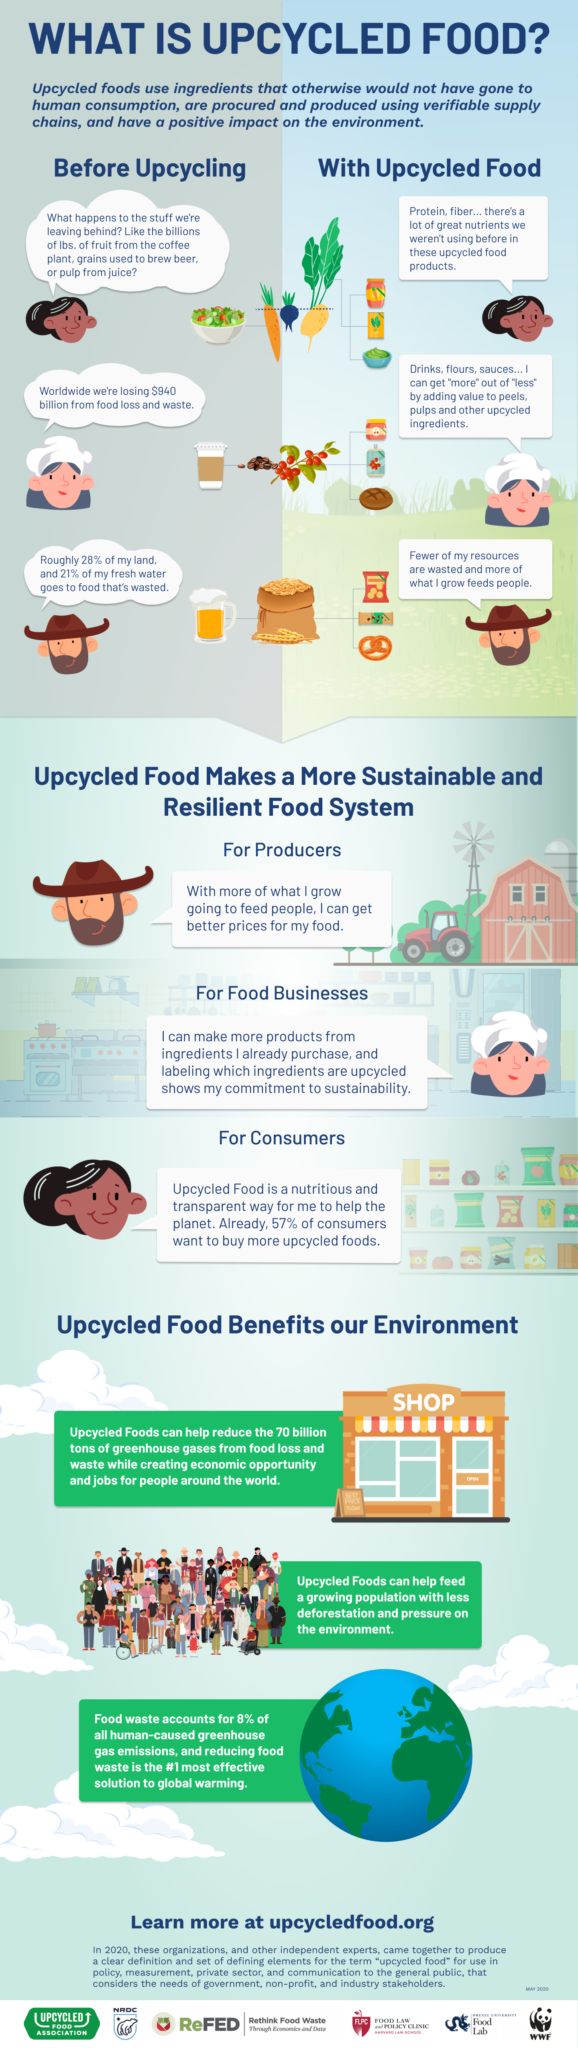 In addition to an official definition of upcycled food, the Upcycled Food Association also produced an infographic to describe the benefits of upcycling.